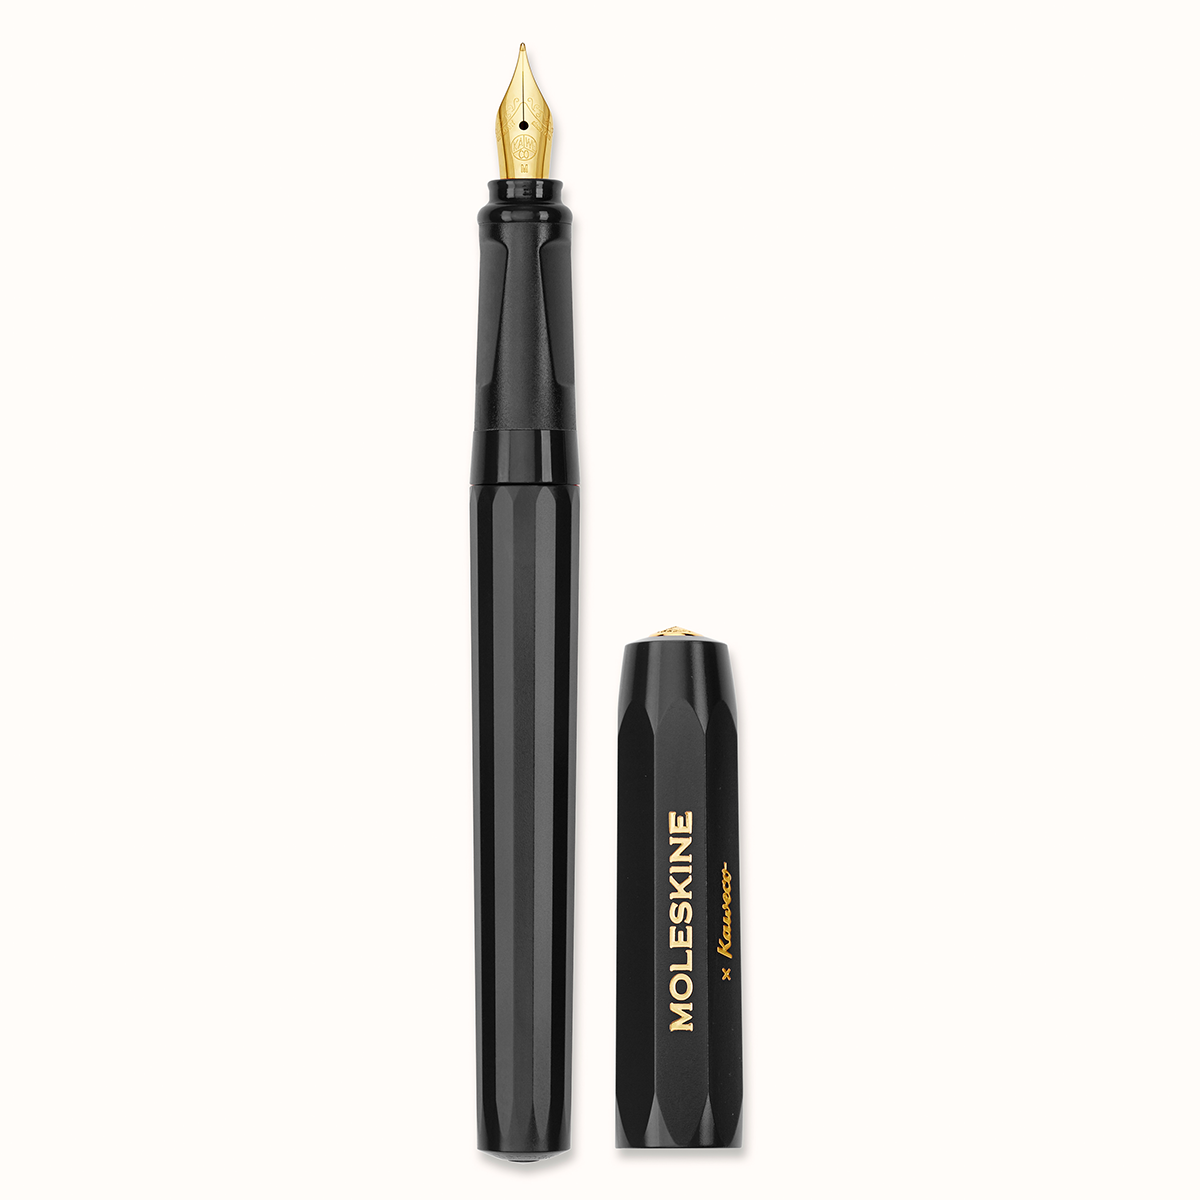 Kaweco x Moleskine Fountain pen Black in the group Pens / Fine Writing / Fountain Pens at Pen Store (128880)